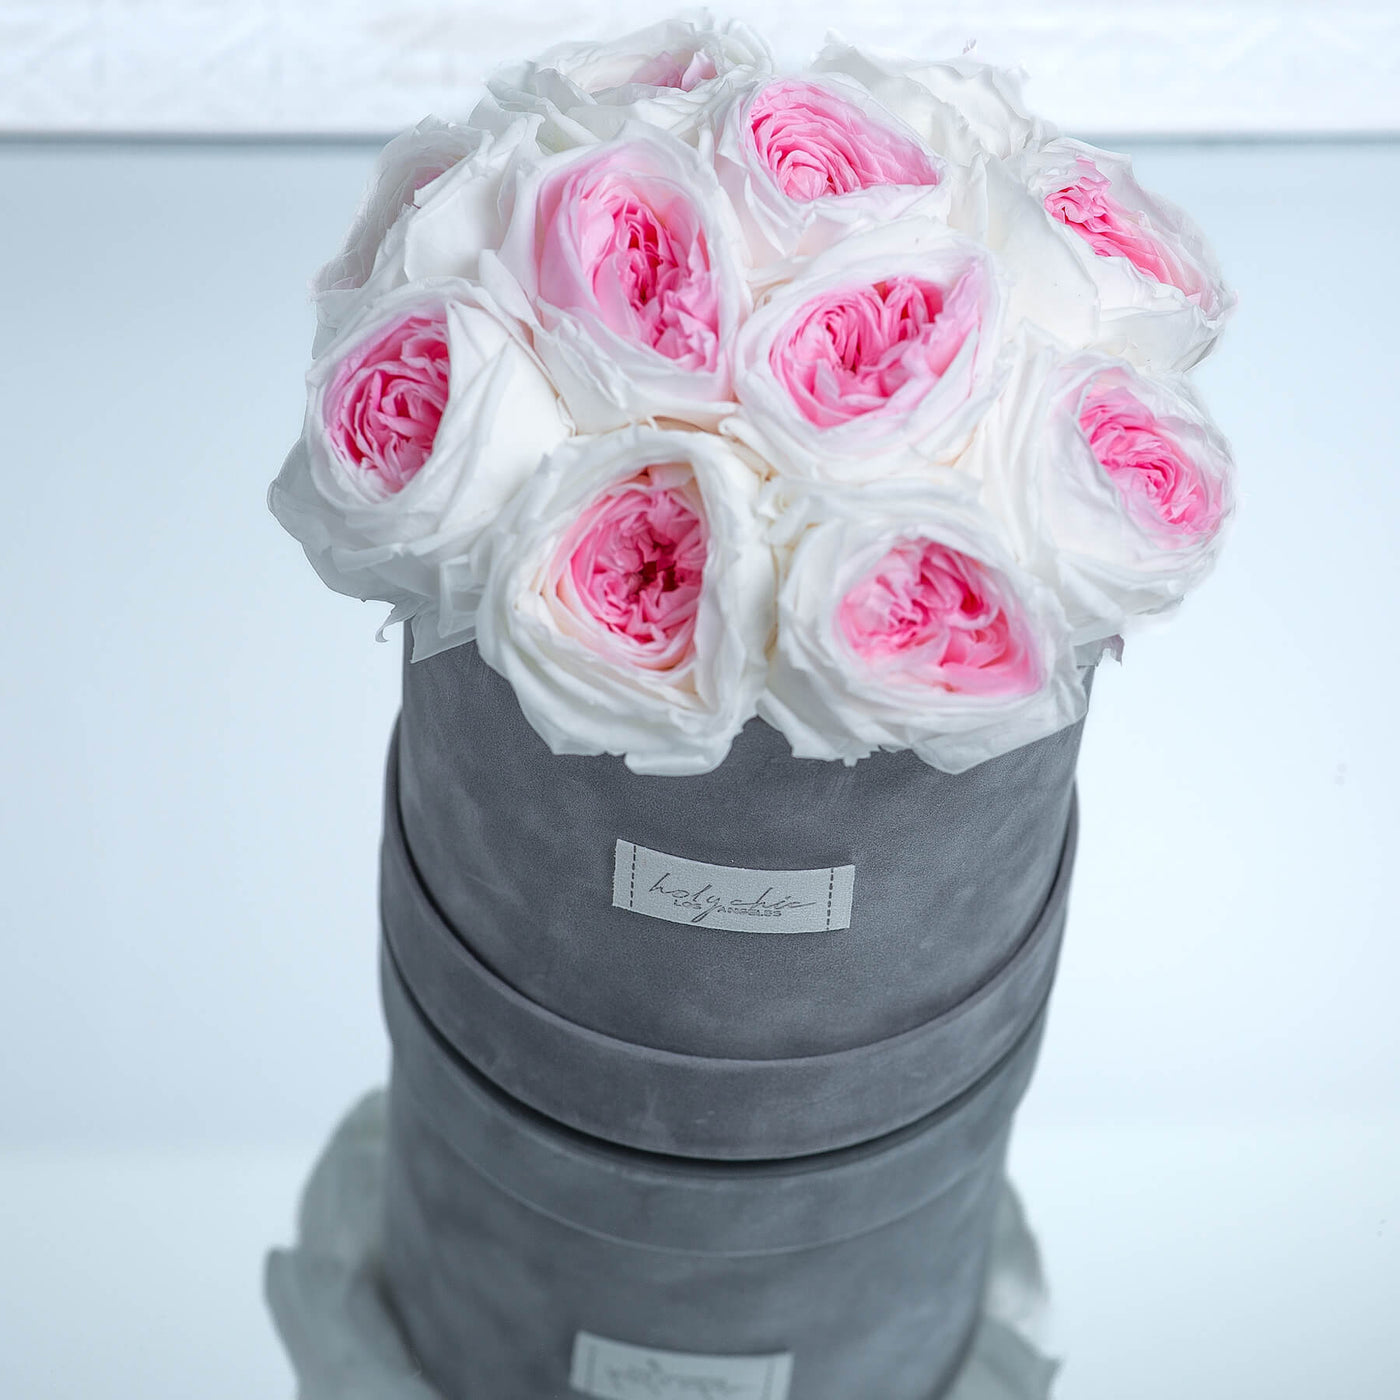 Forever roses set in a round suede box